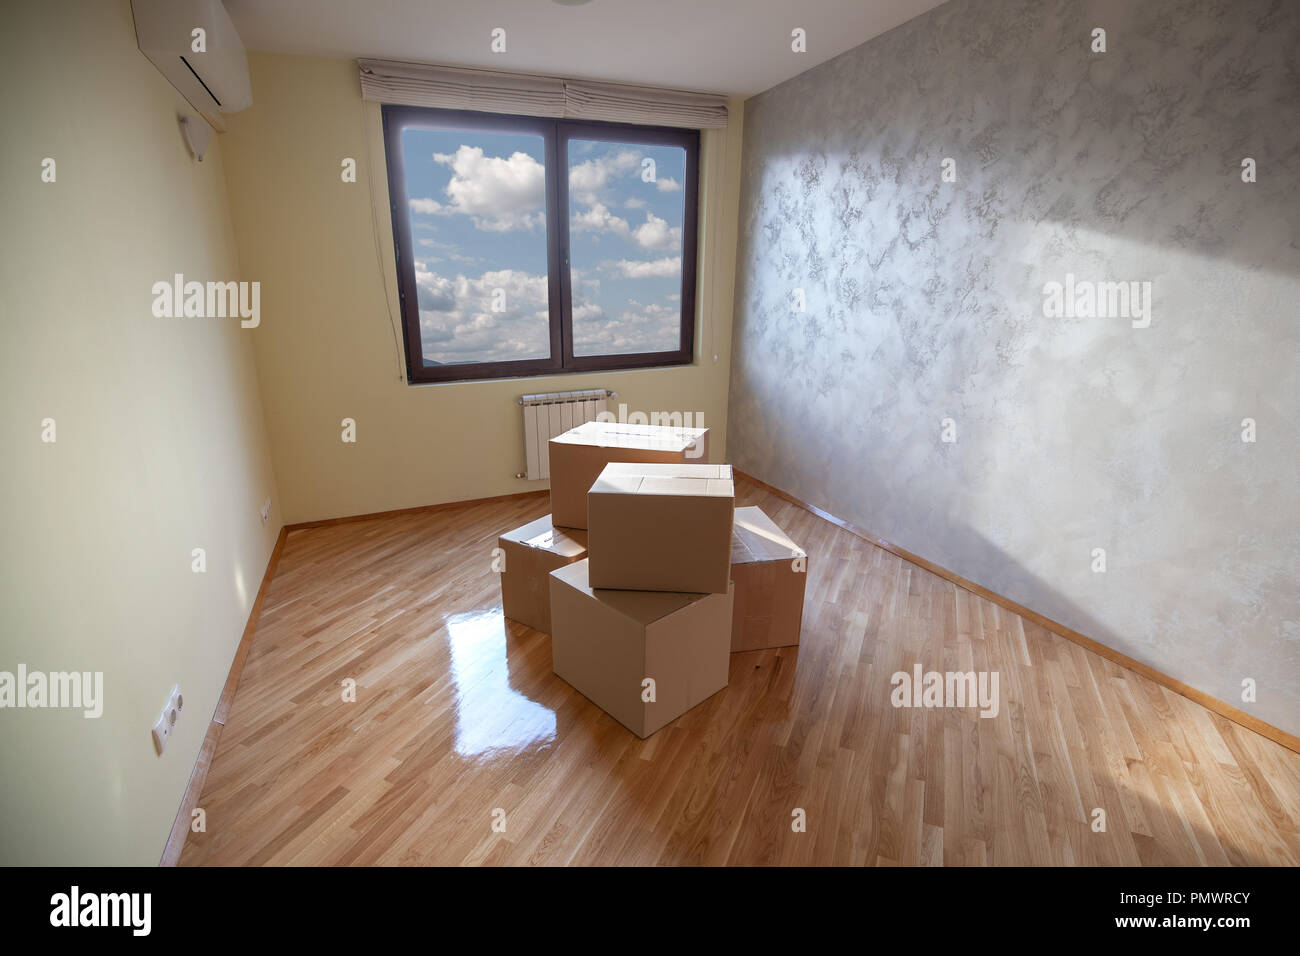 Renewed room with painted walls, varnished lacquered parquet and several carton boxes in the middle. Stock Photo